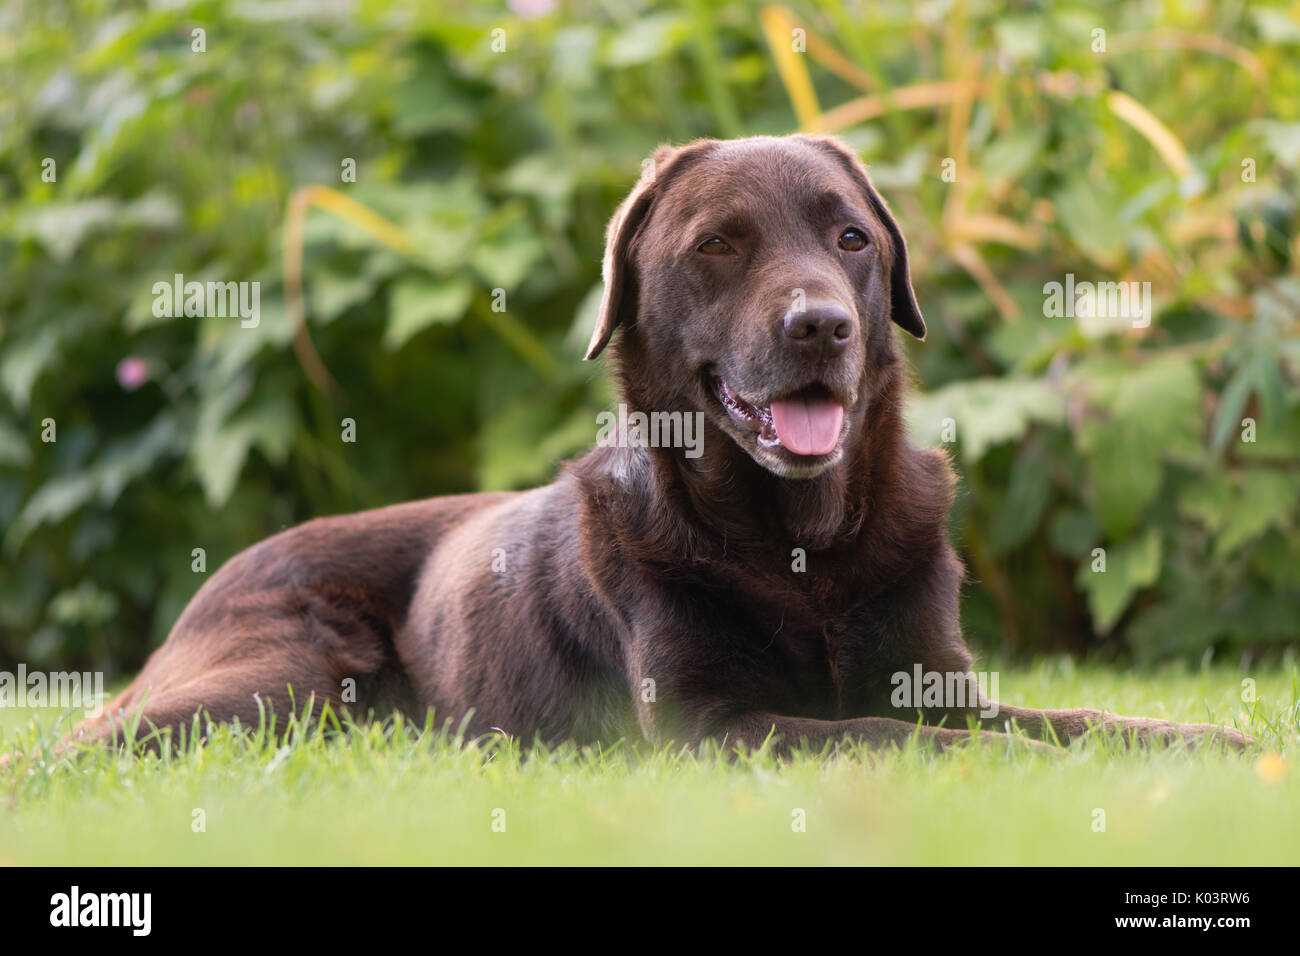 Chocolate labrador lying down. Brown dog on grass in front of flowers Stock Photo